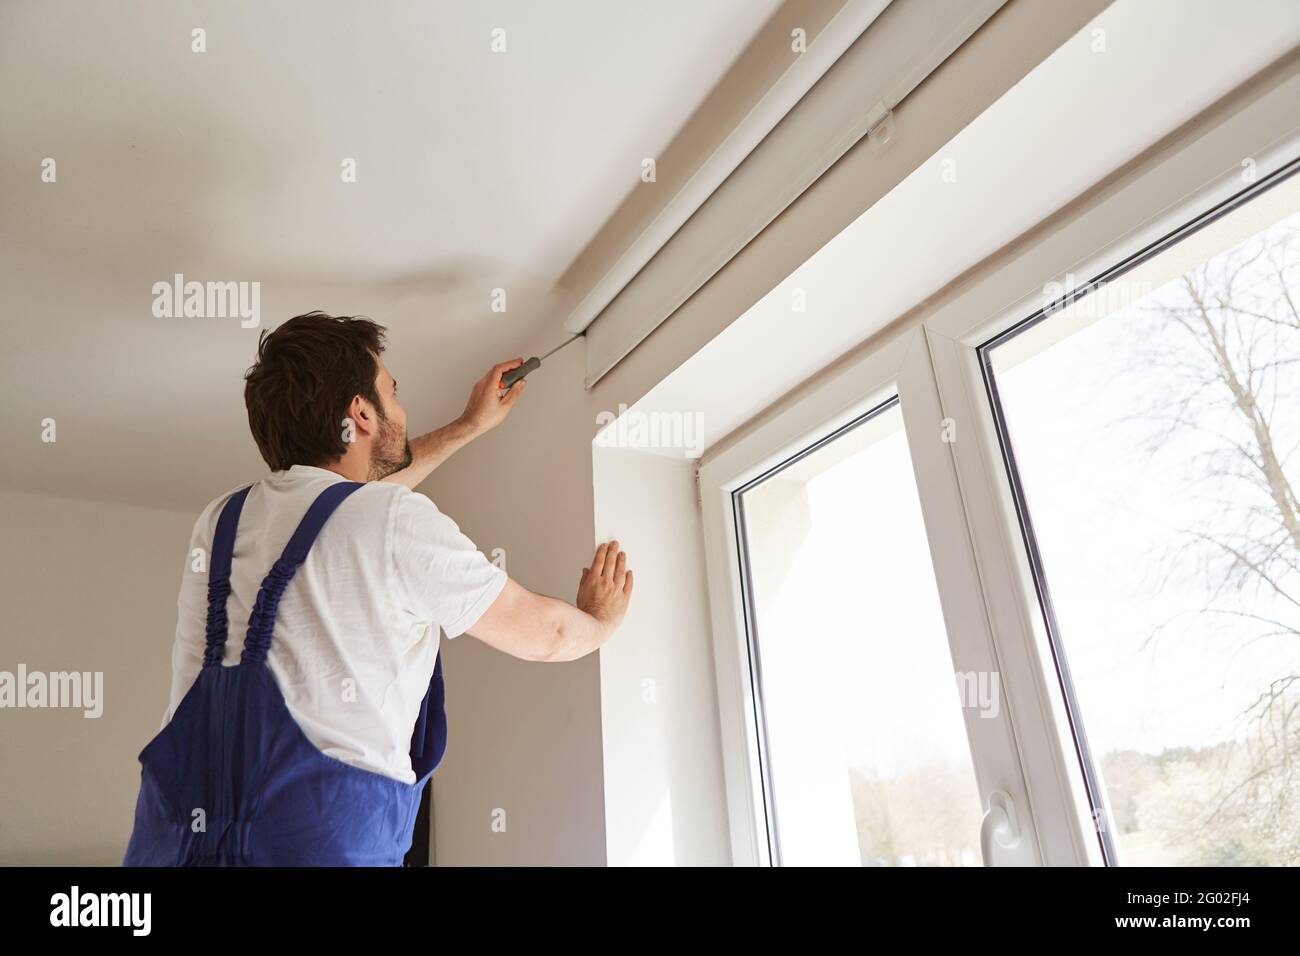 Craftsman or do-it-yourselfer installing a blind on the window of an apartment Stock Photo